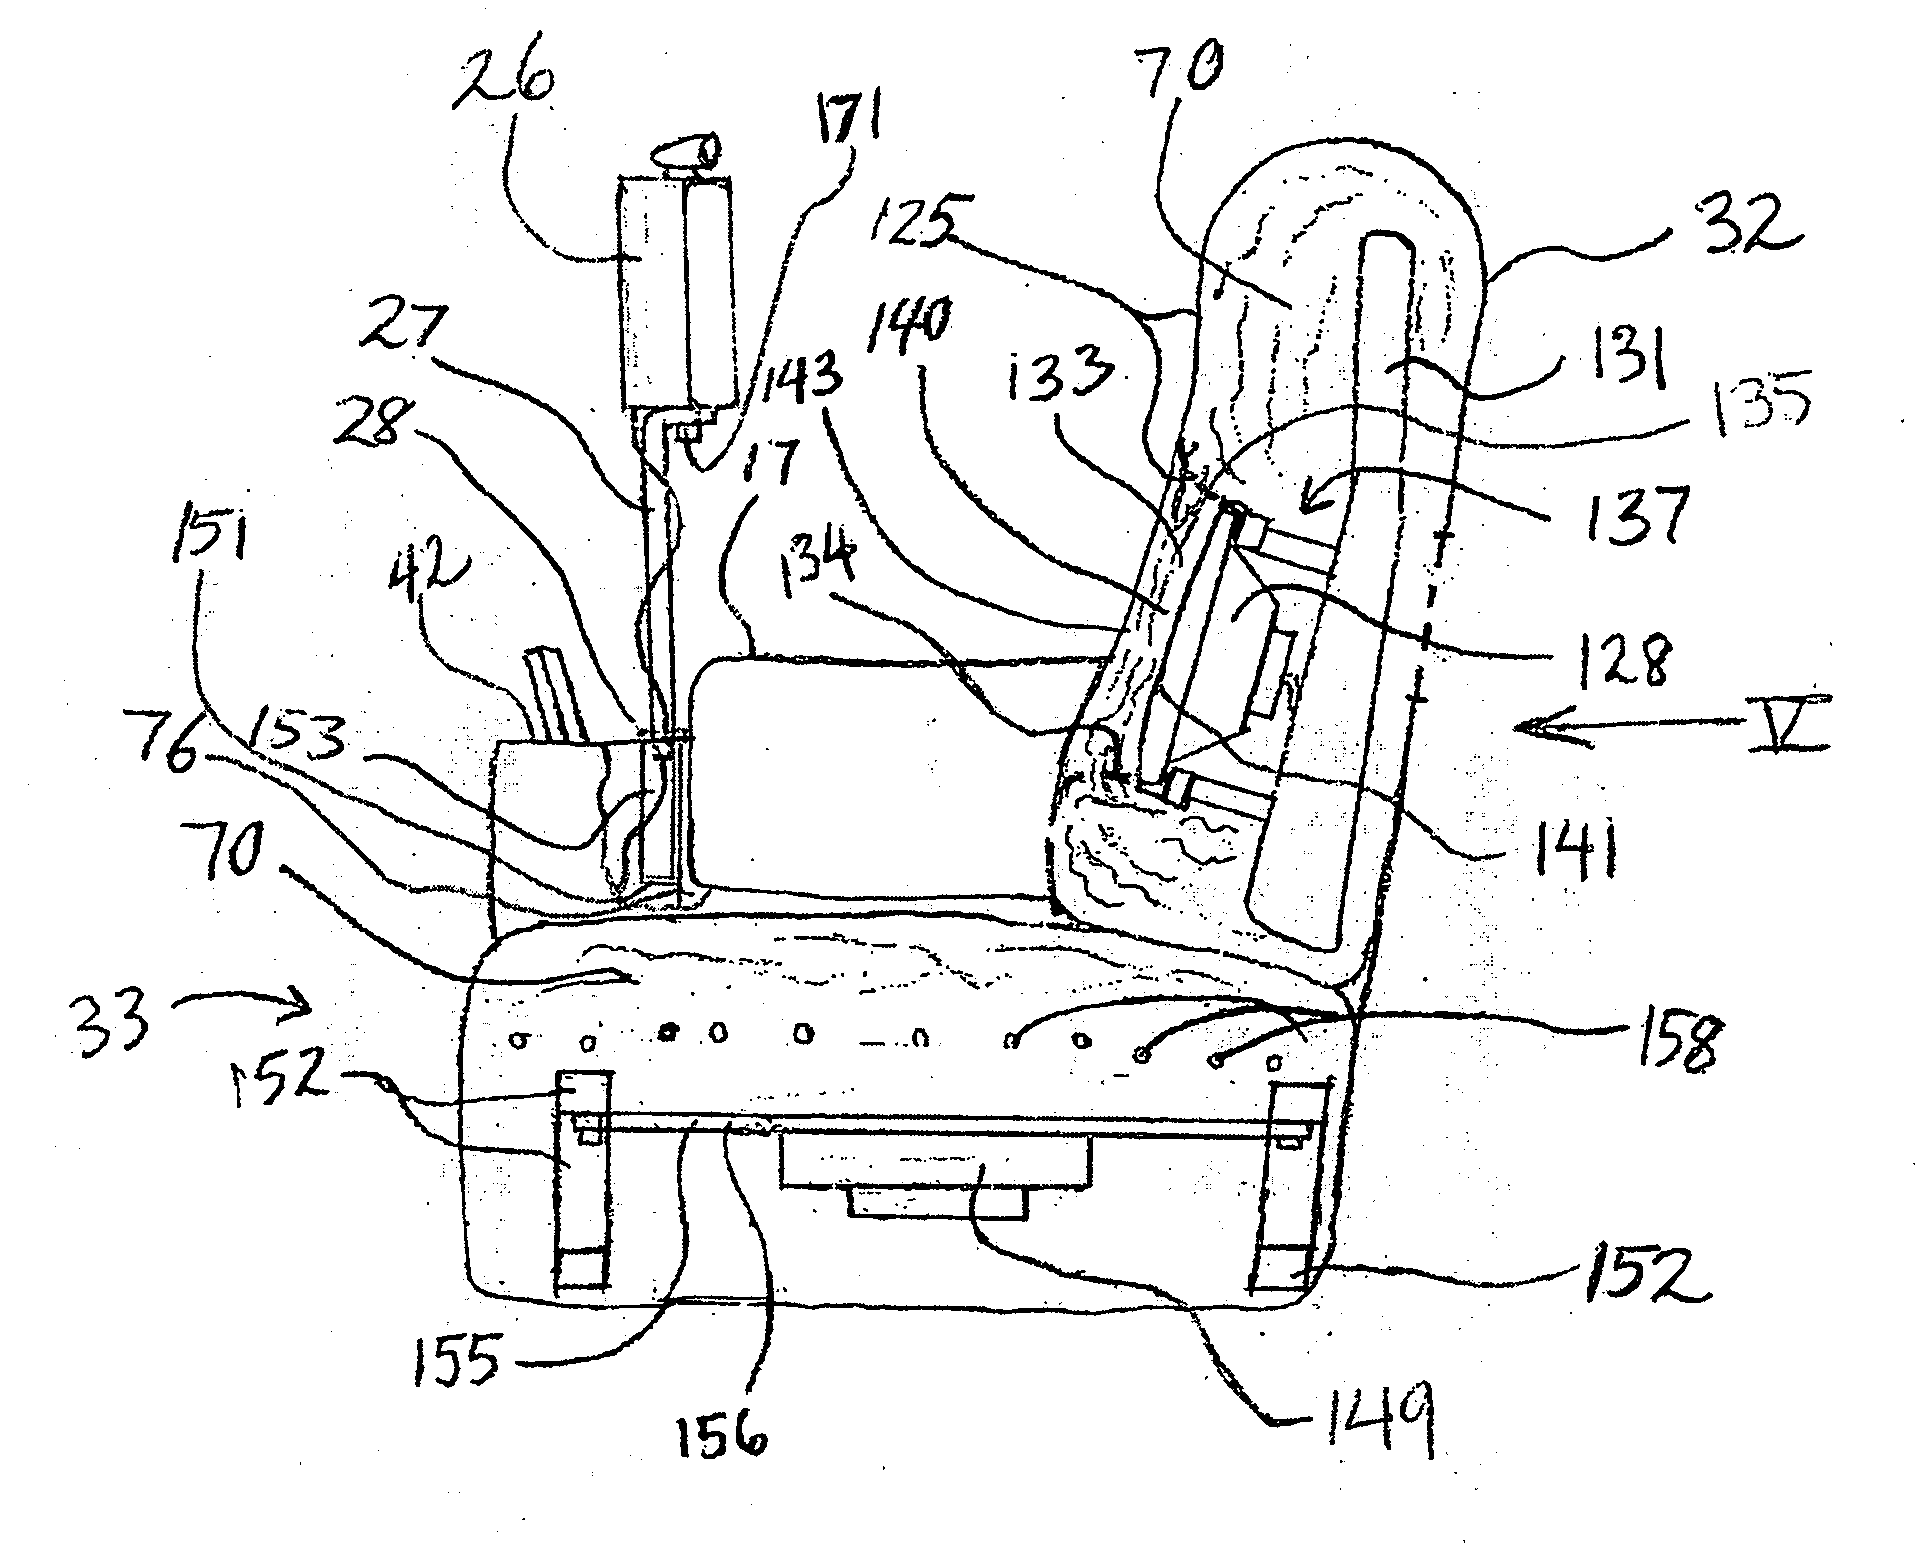 Apparatus, system, and method for an entertainment chair